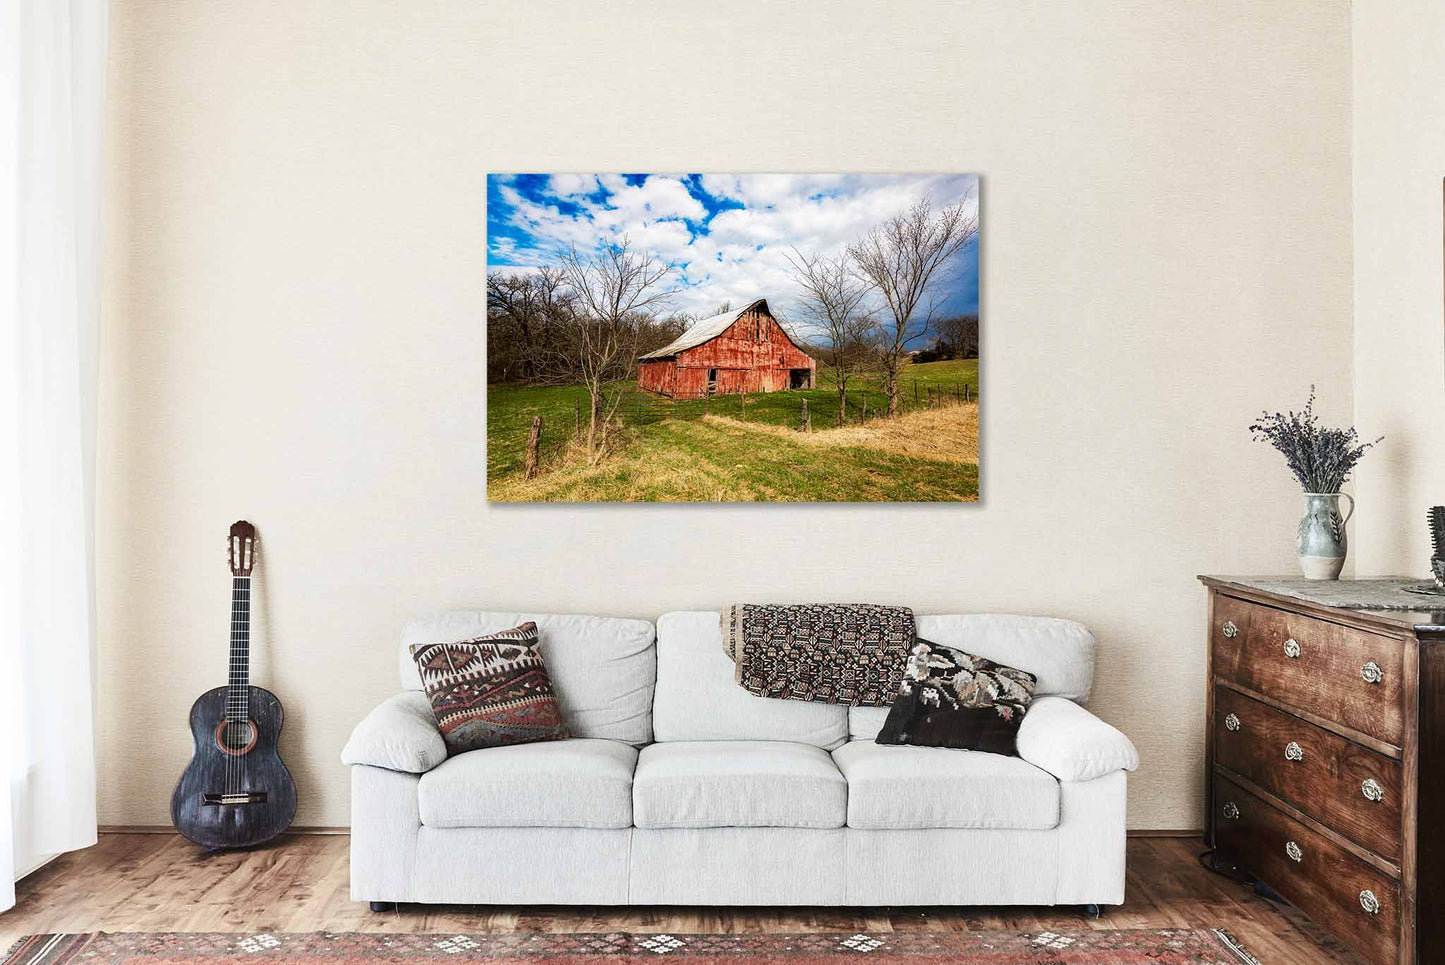 Country Canvas Wall Art (Ready to Hang) Gallery Wrap of Old Red Barn with Worn Paint in Missouri Farm Photography Farmhouse Decor